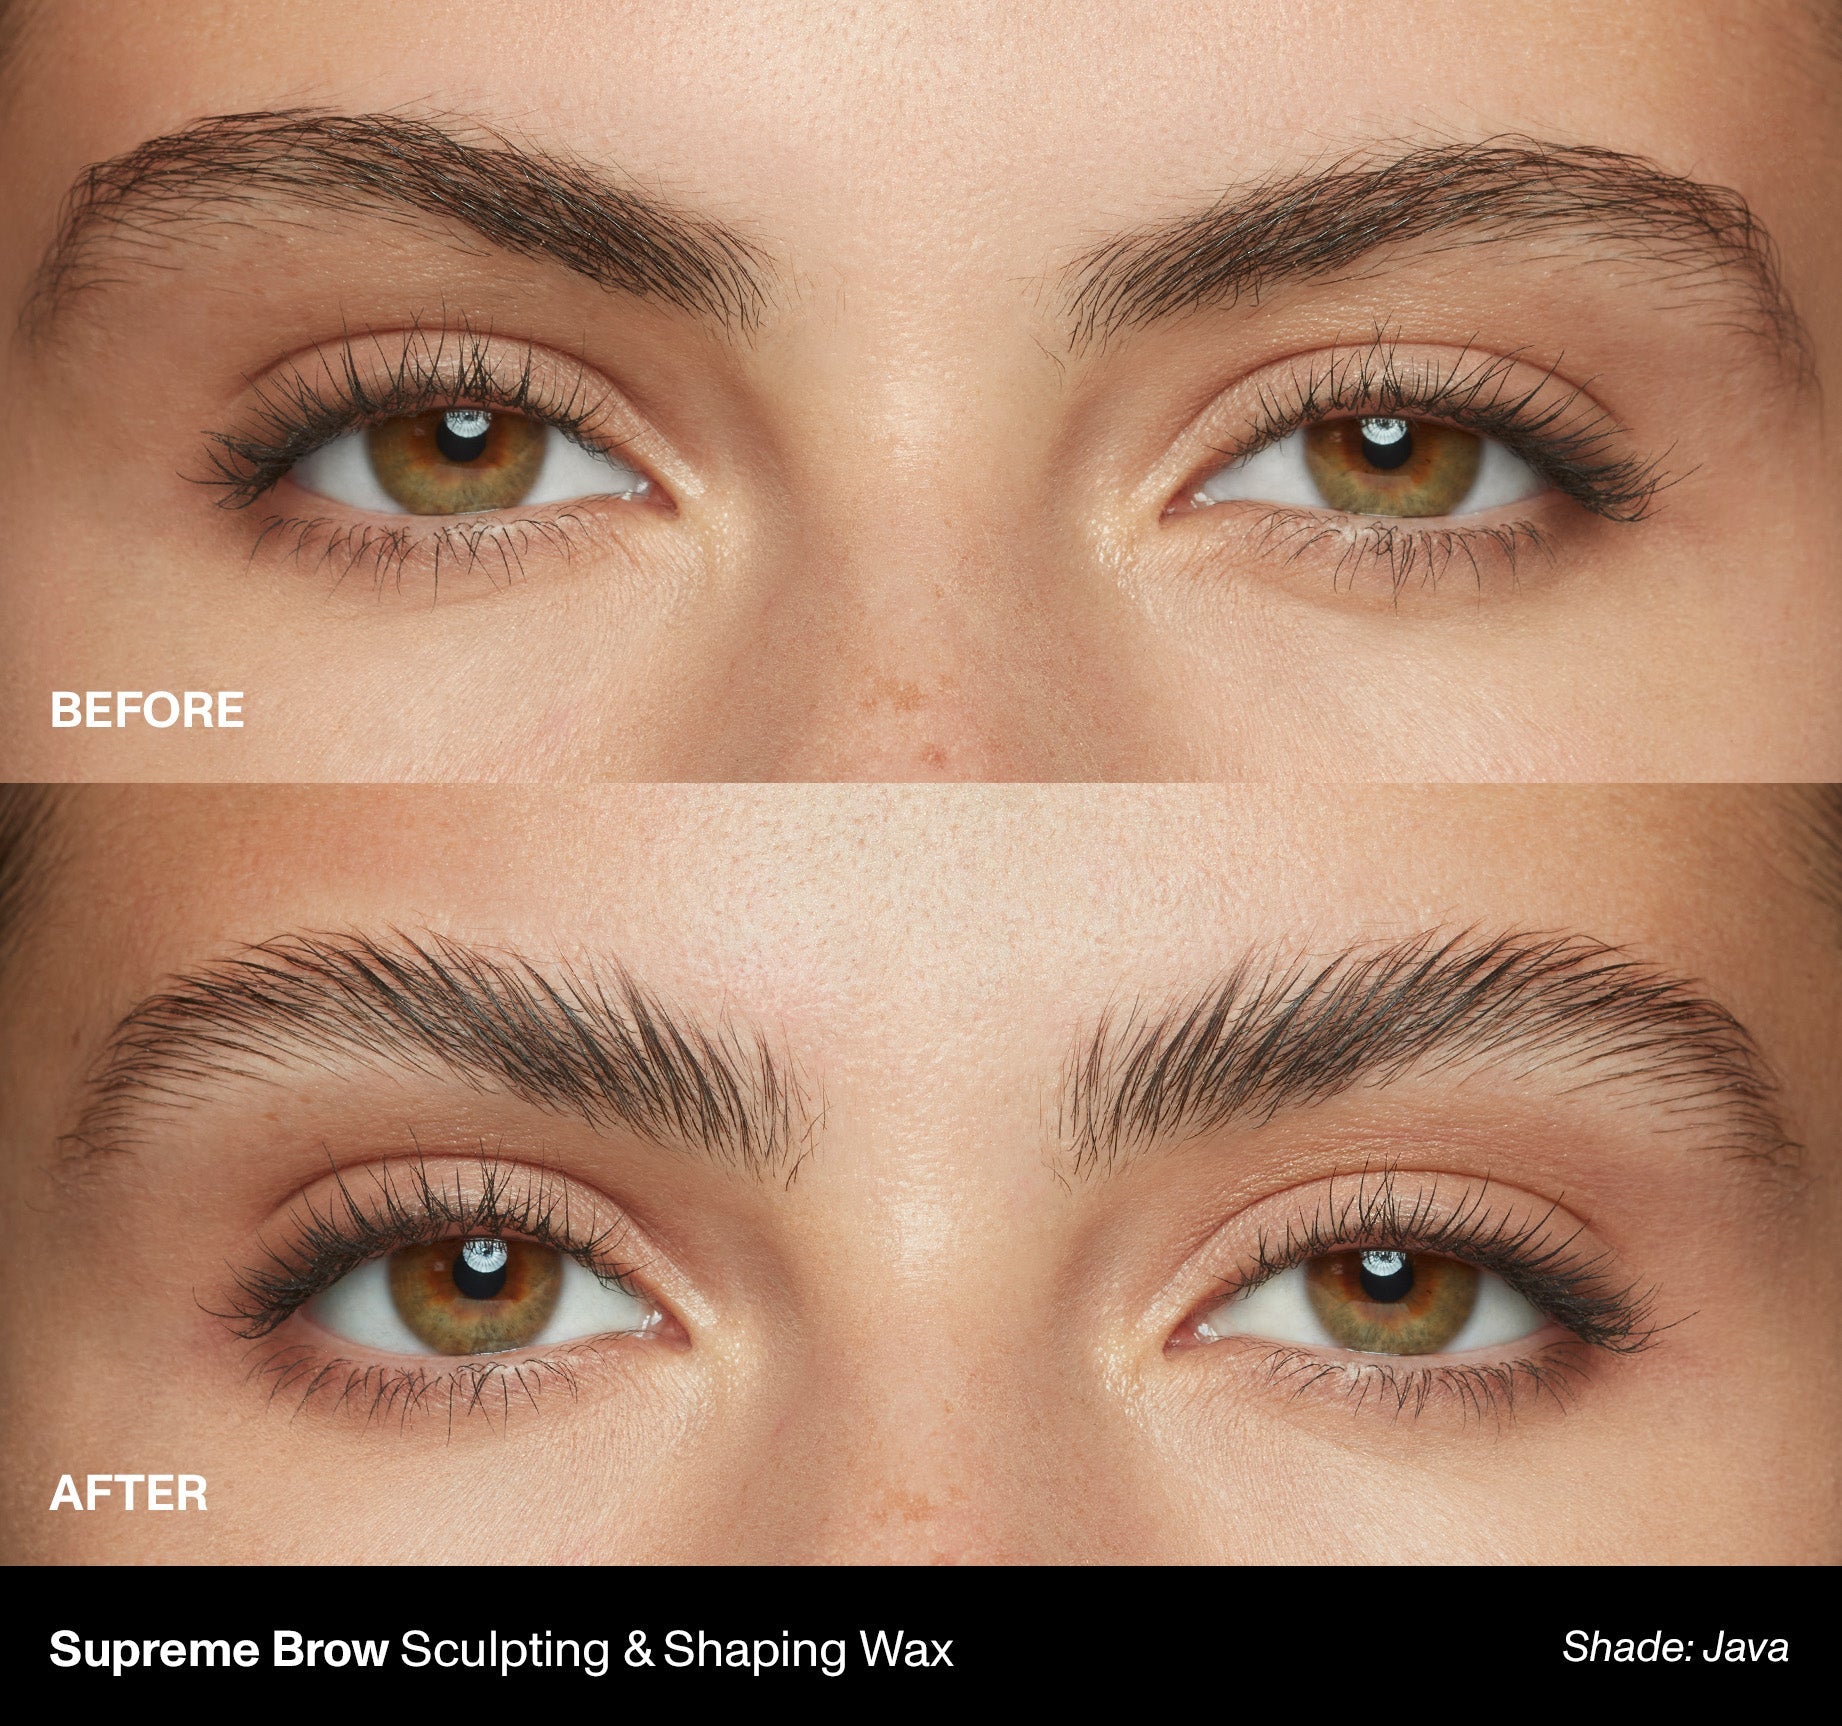 Supreme Brow Sculpting And Shaping Wax - Java - Image 5